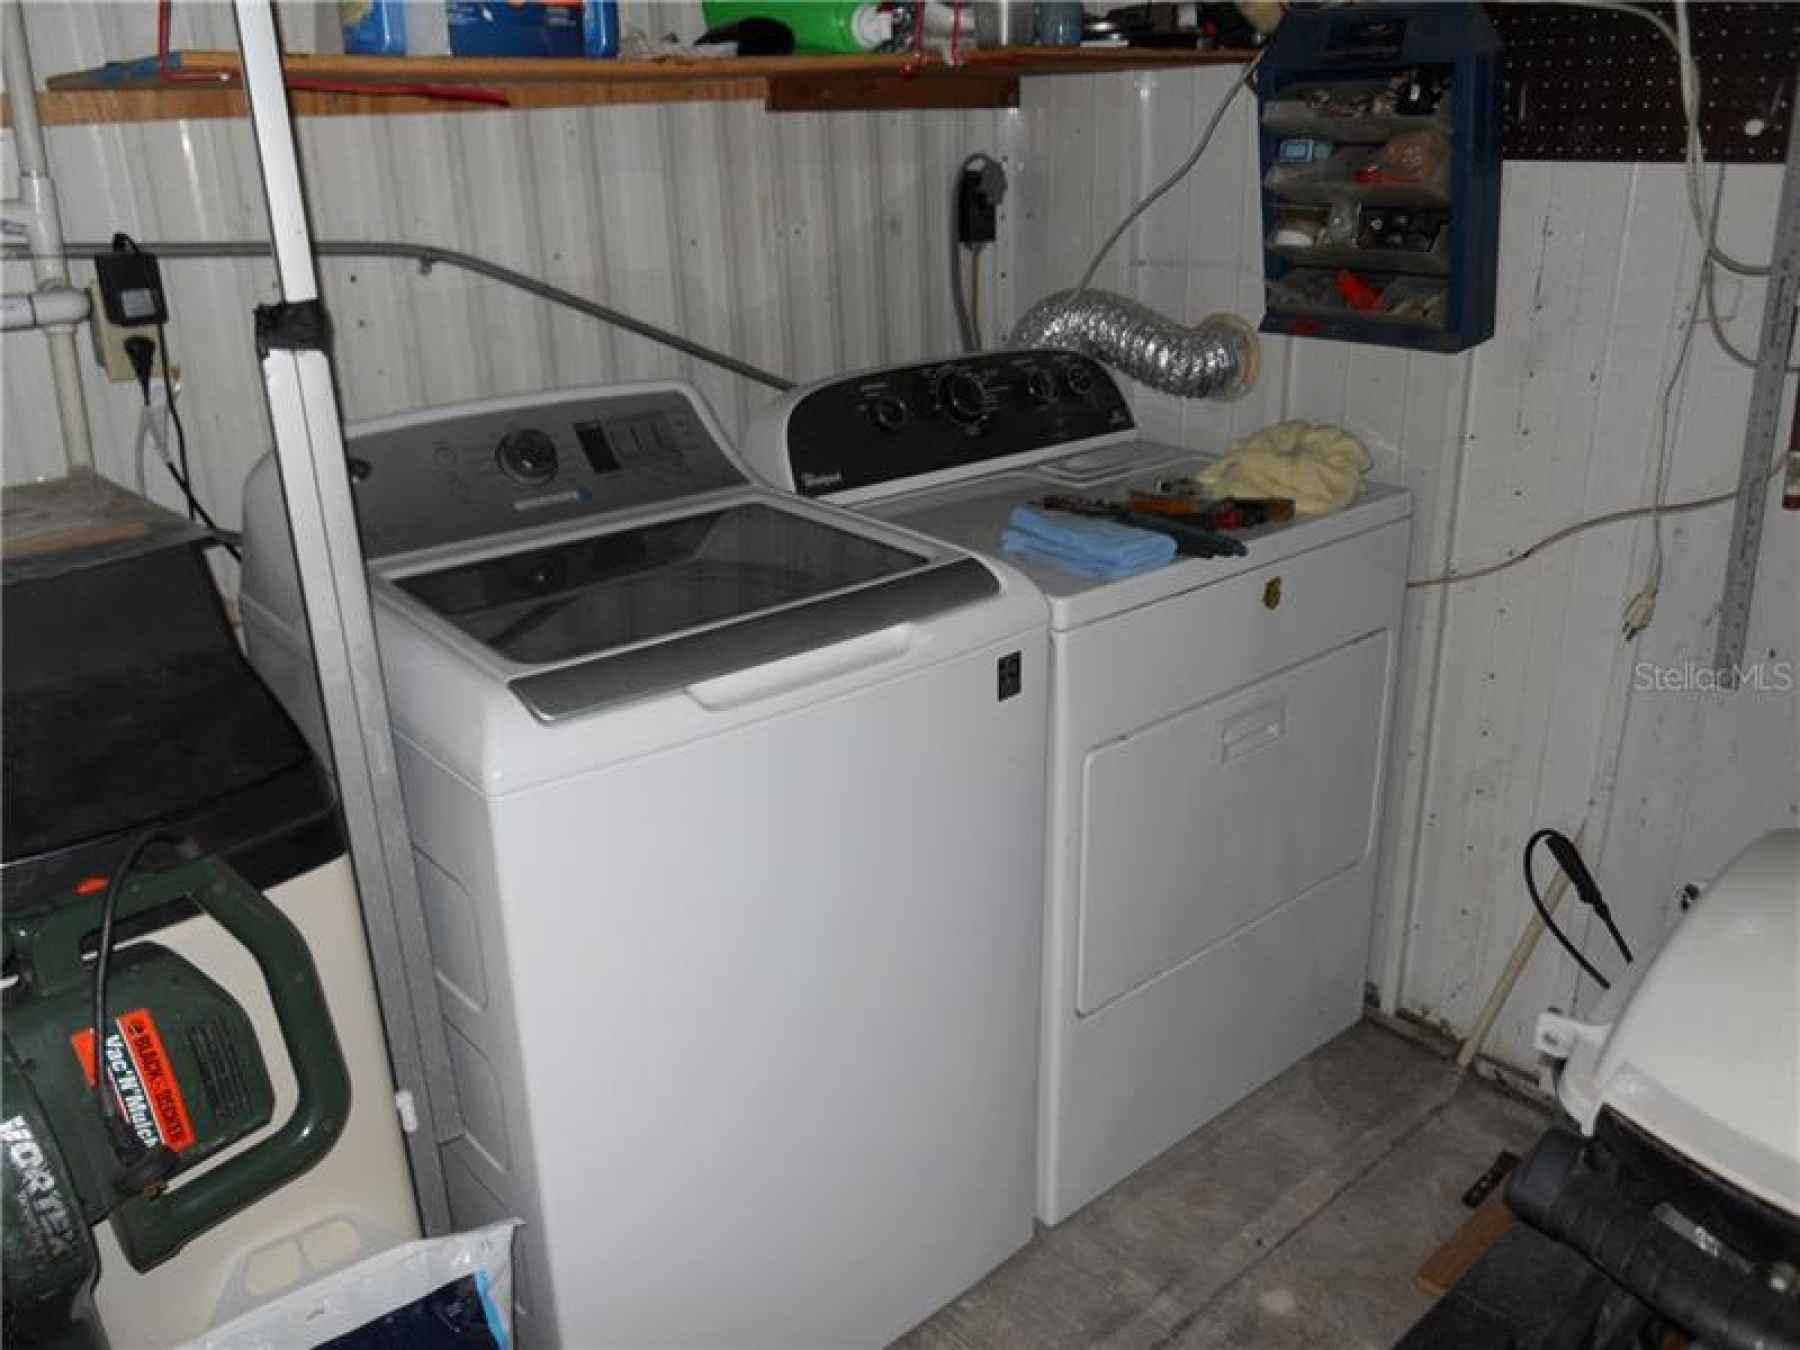 Washer and dryer in utility room.